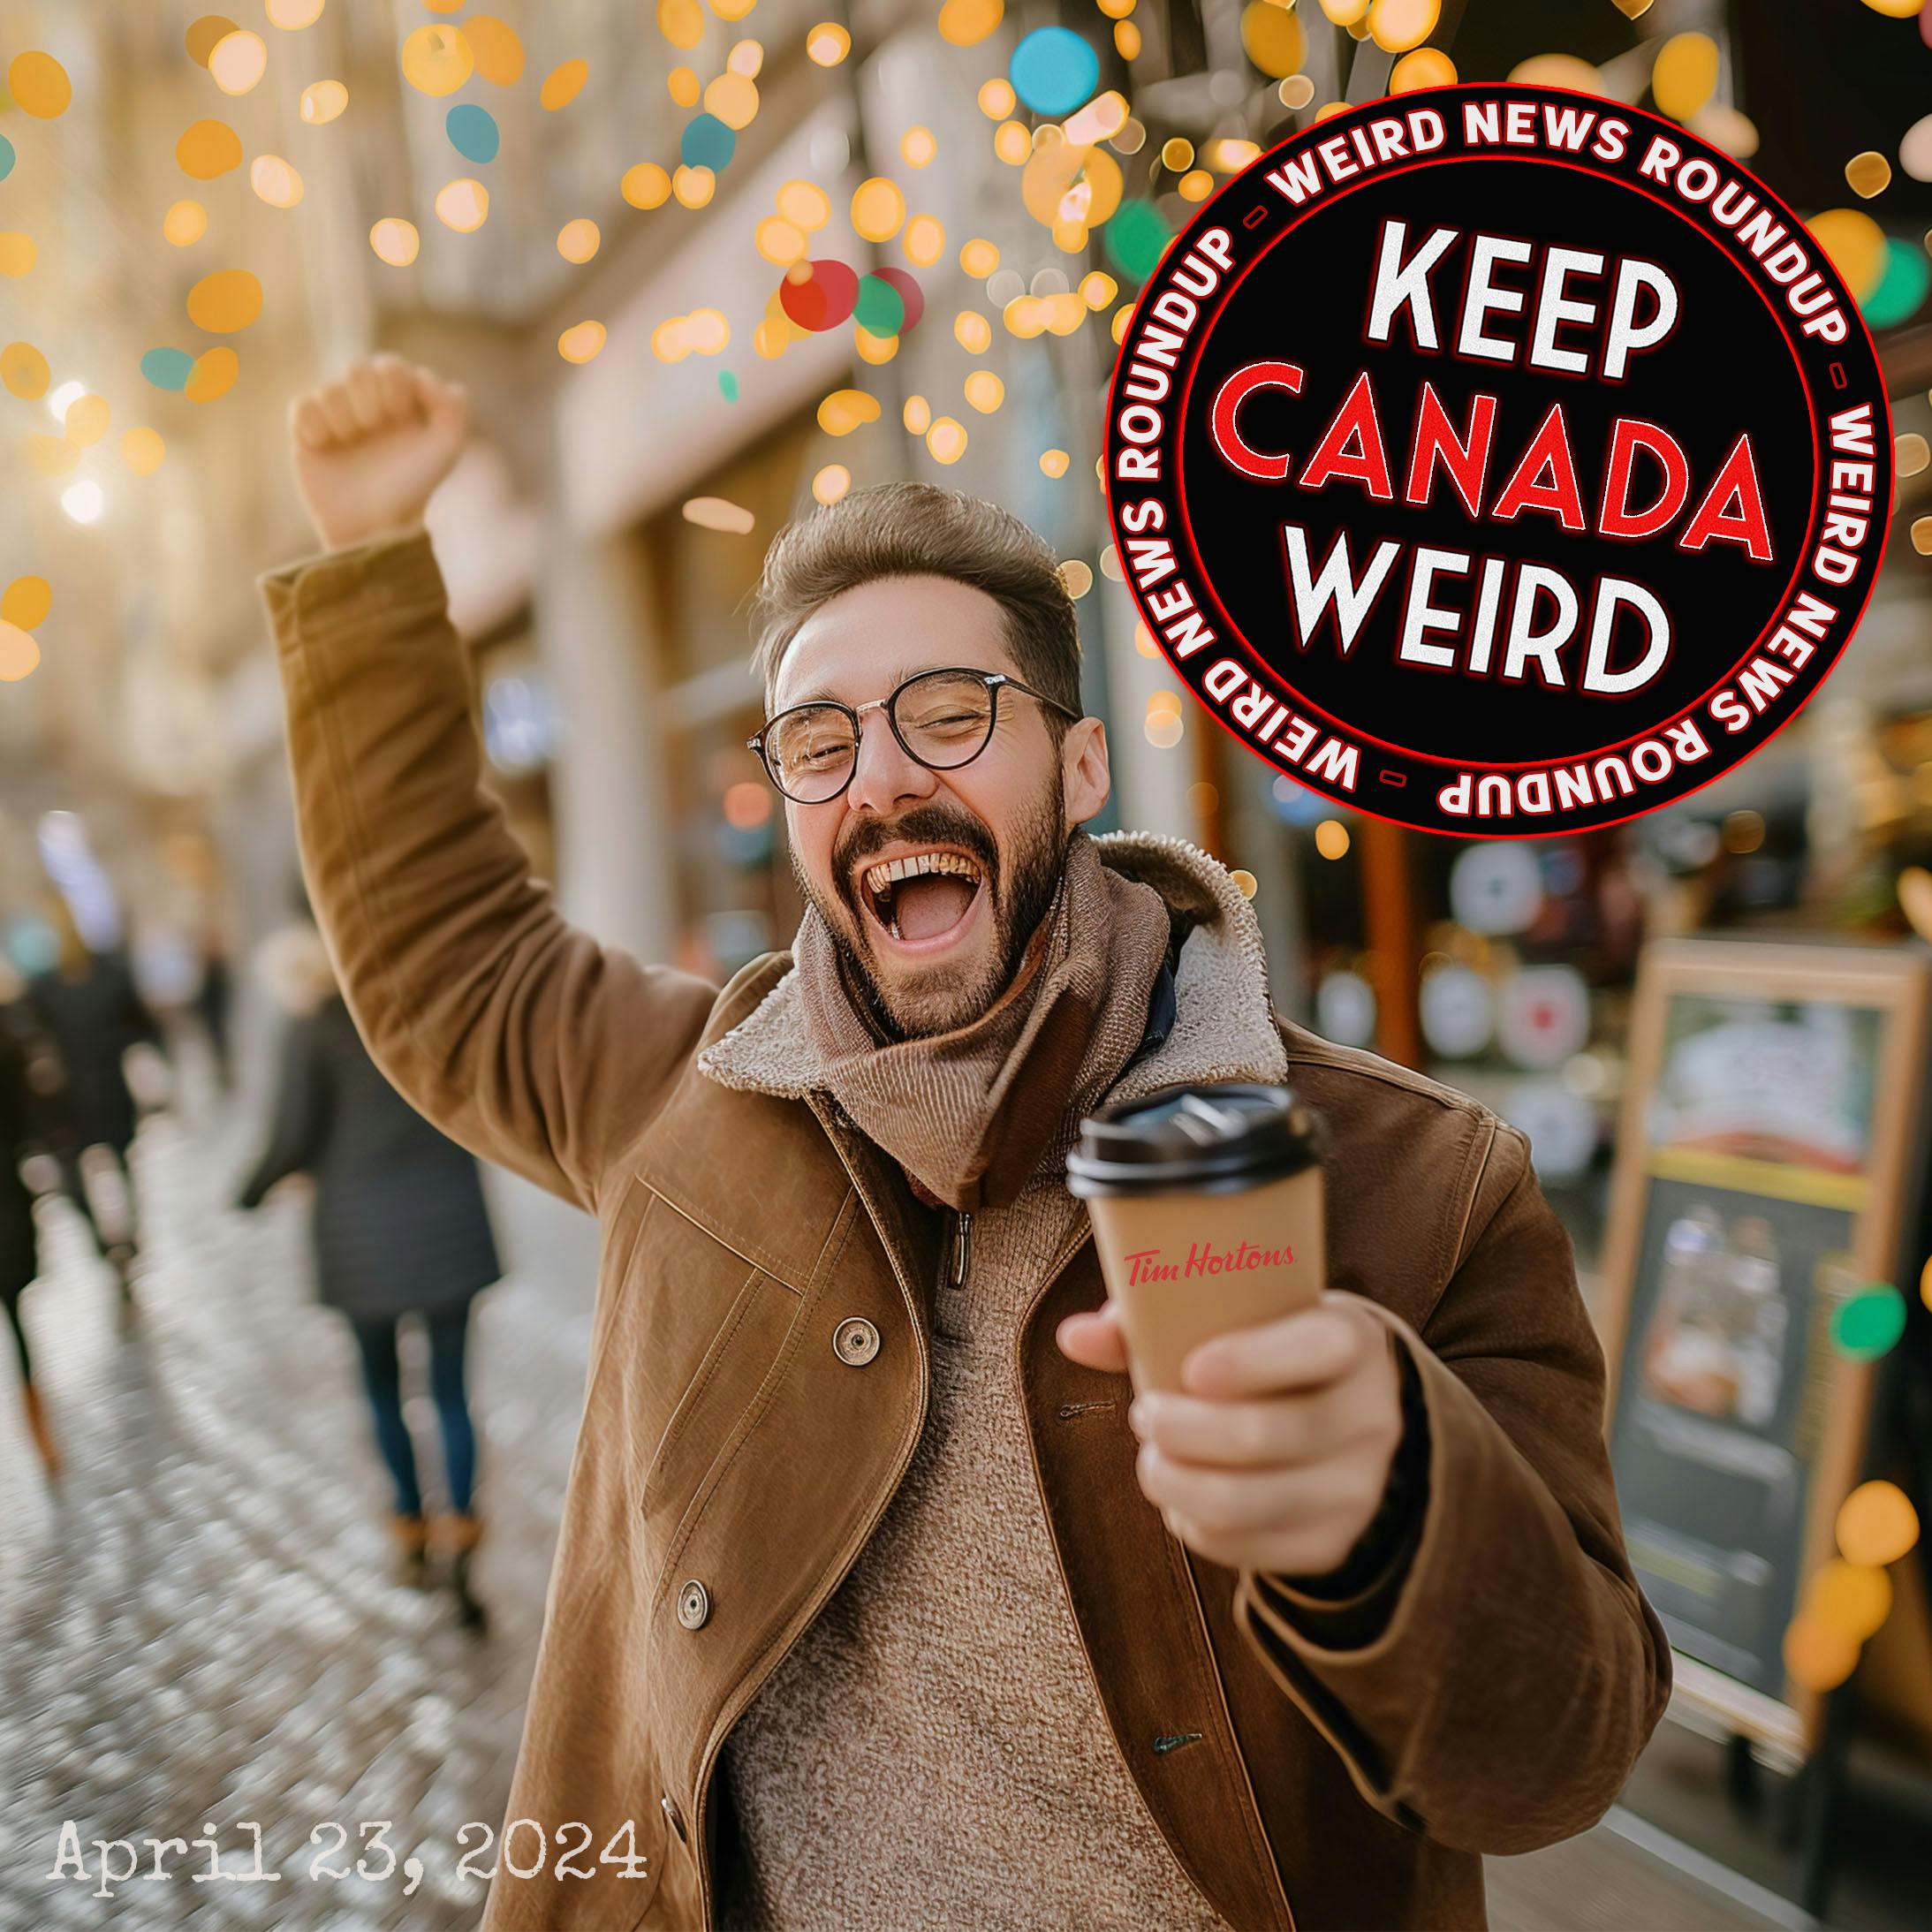 KEEP CANADA WEIRD - April 23, 2024 - Tim Horton’s latest mistake, the wrong body, and steal from Loblaw’s day